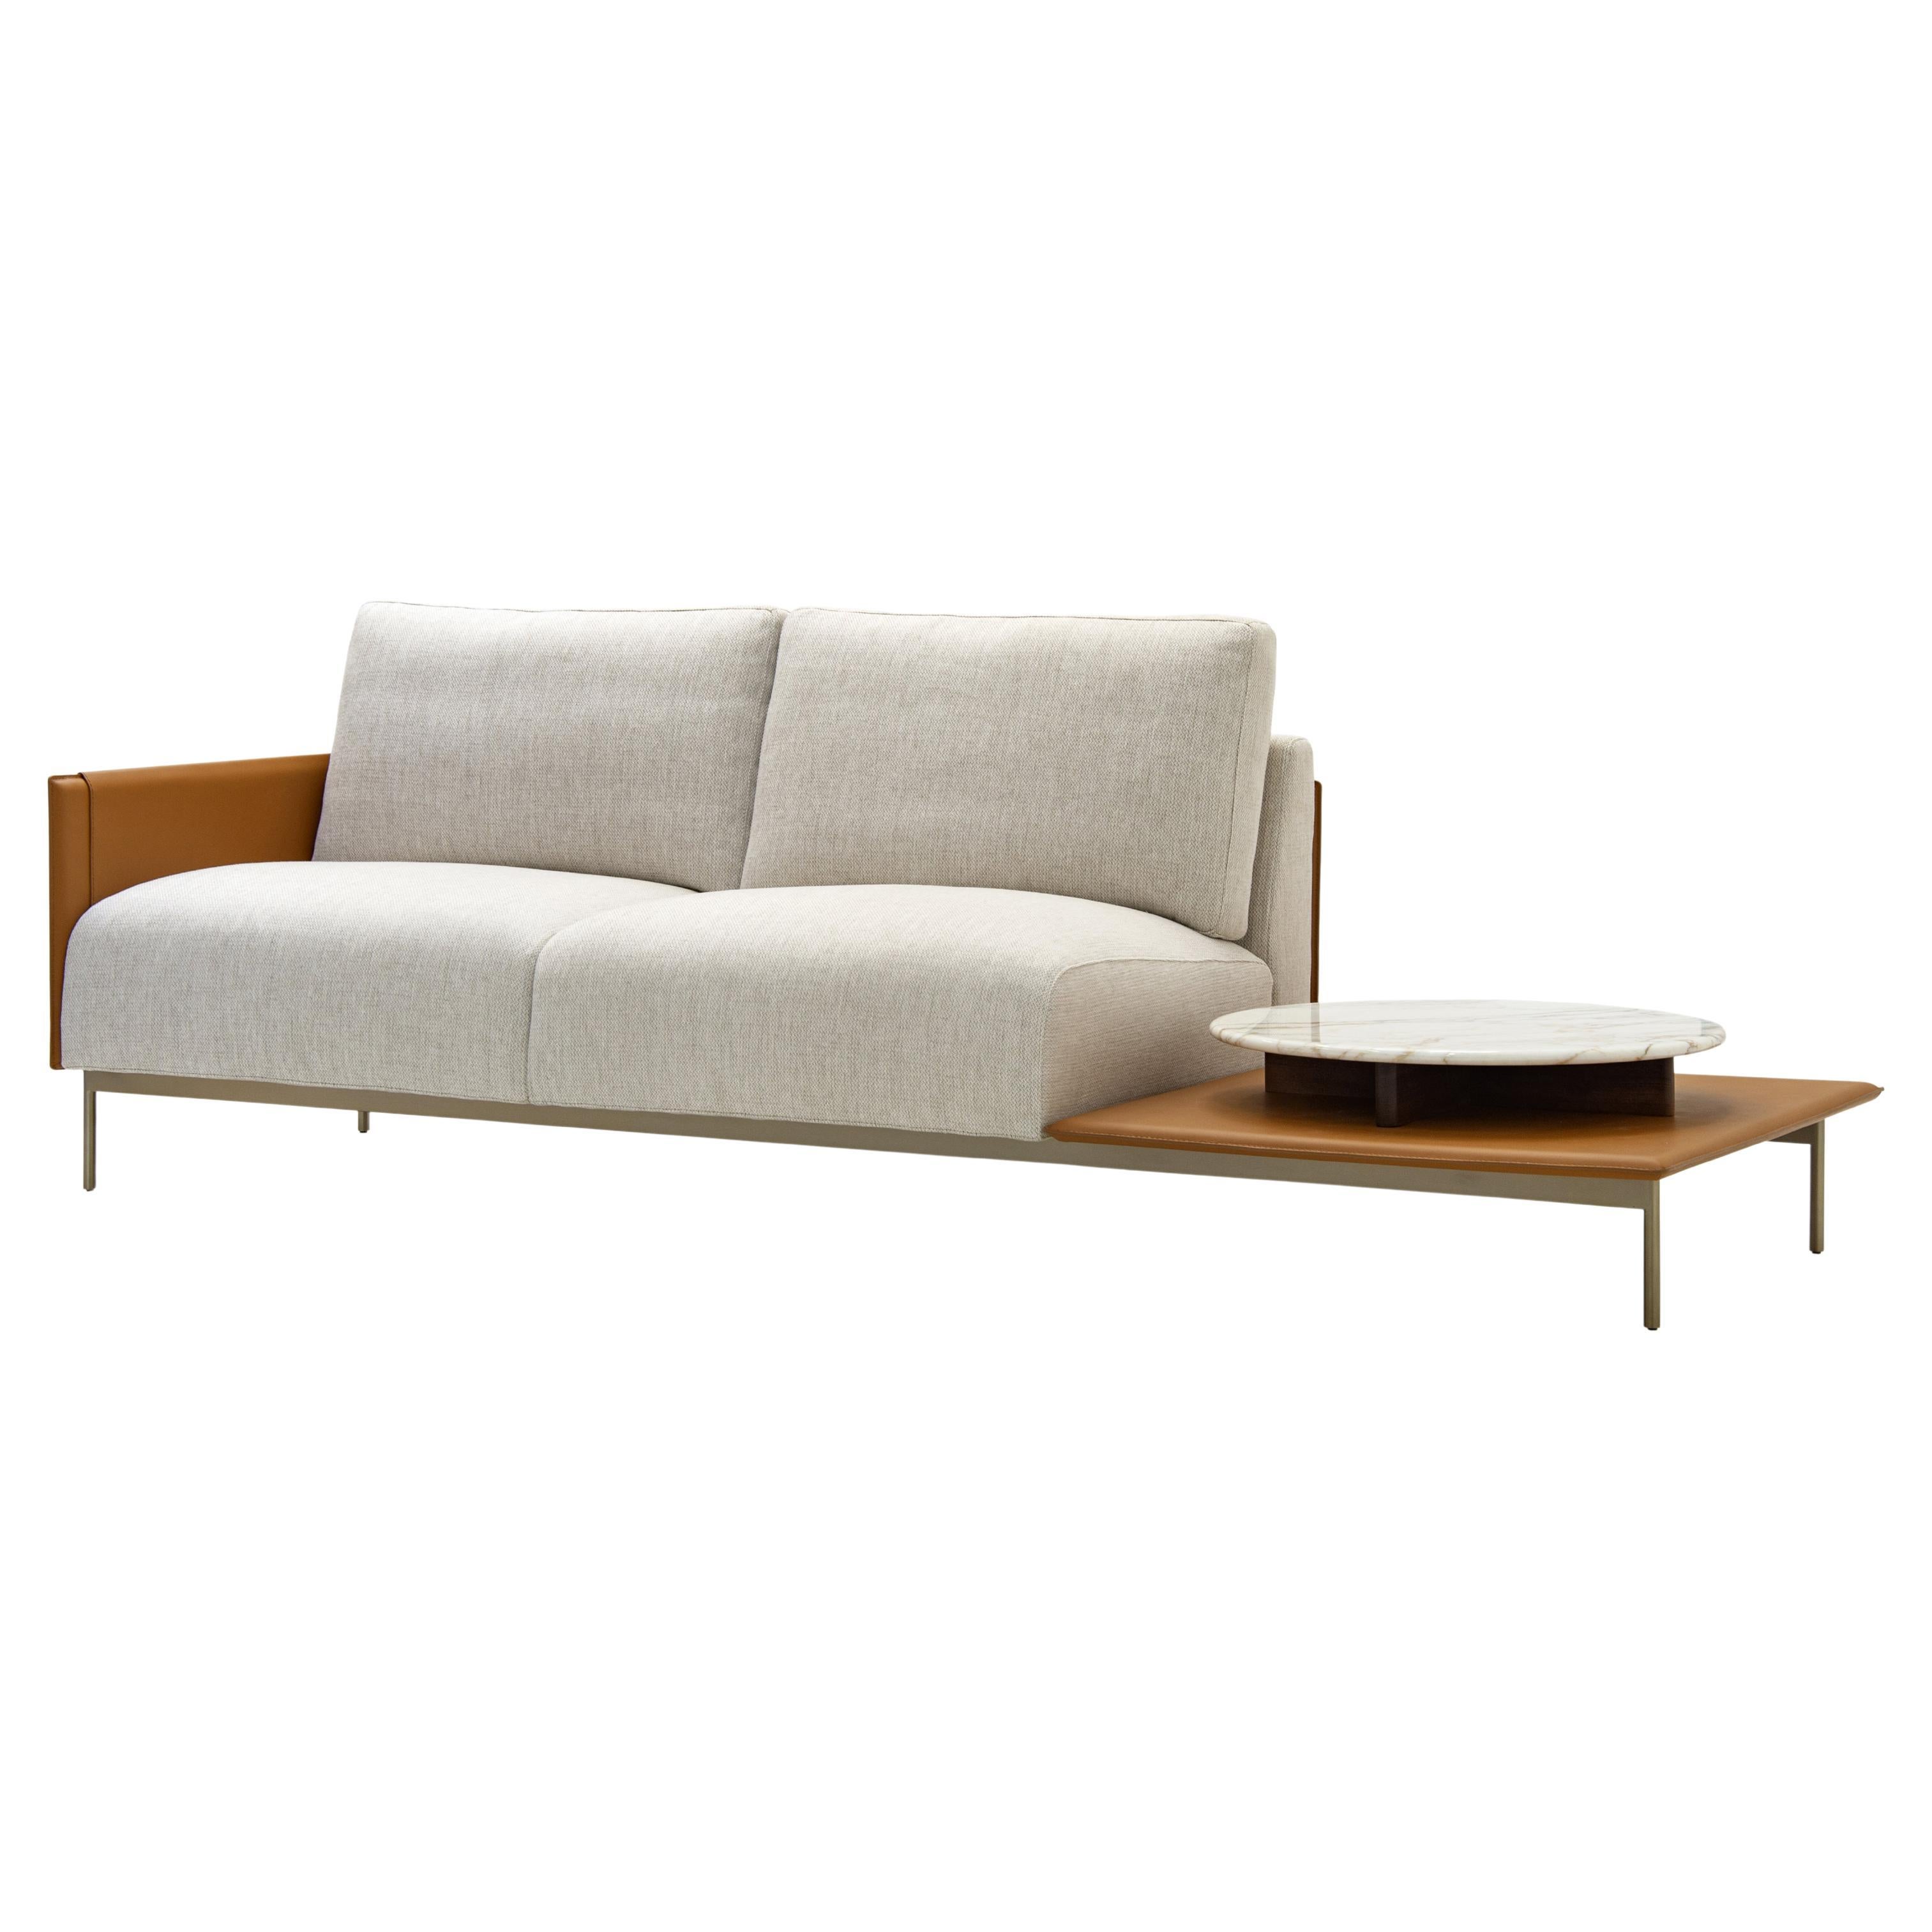 Contemporary Design, Iconic Sofa with Tray in Natural Saddle Leather V215/T For Sale